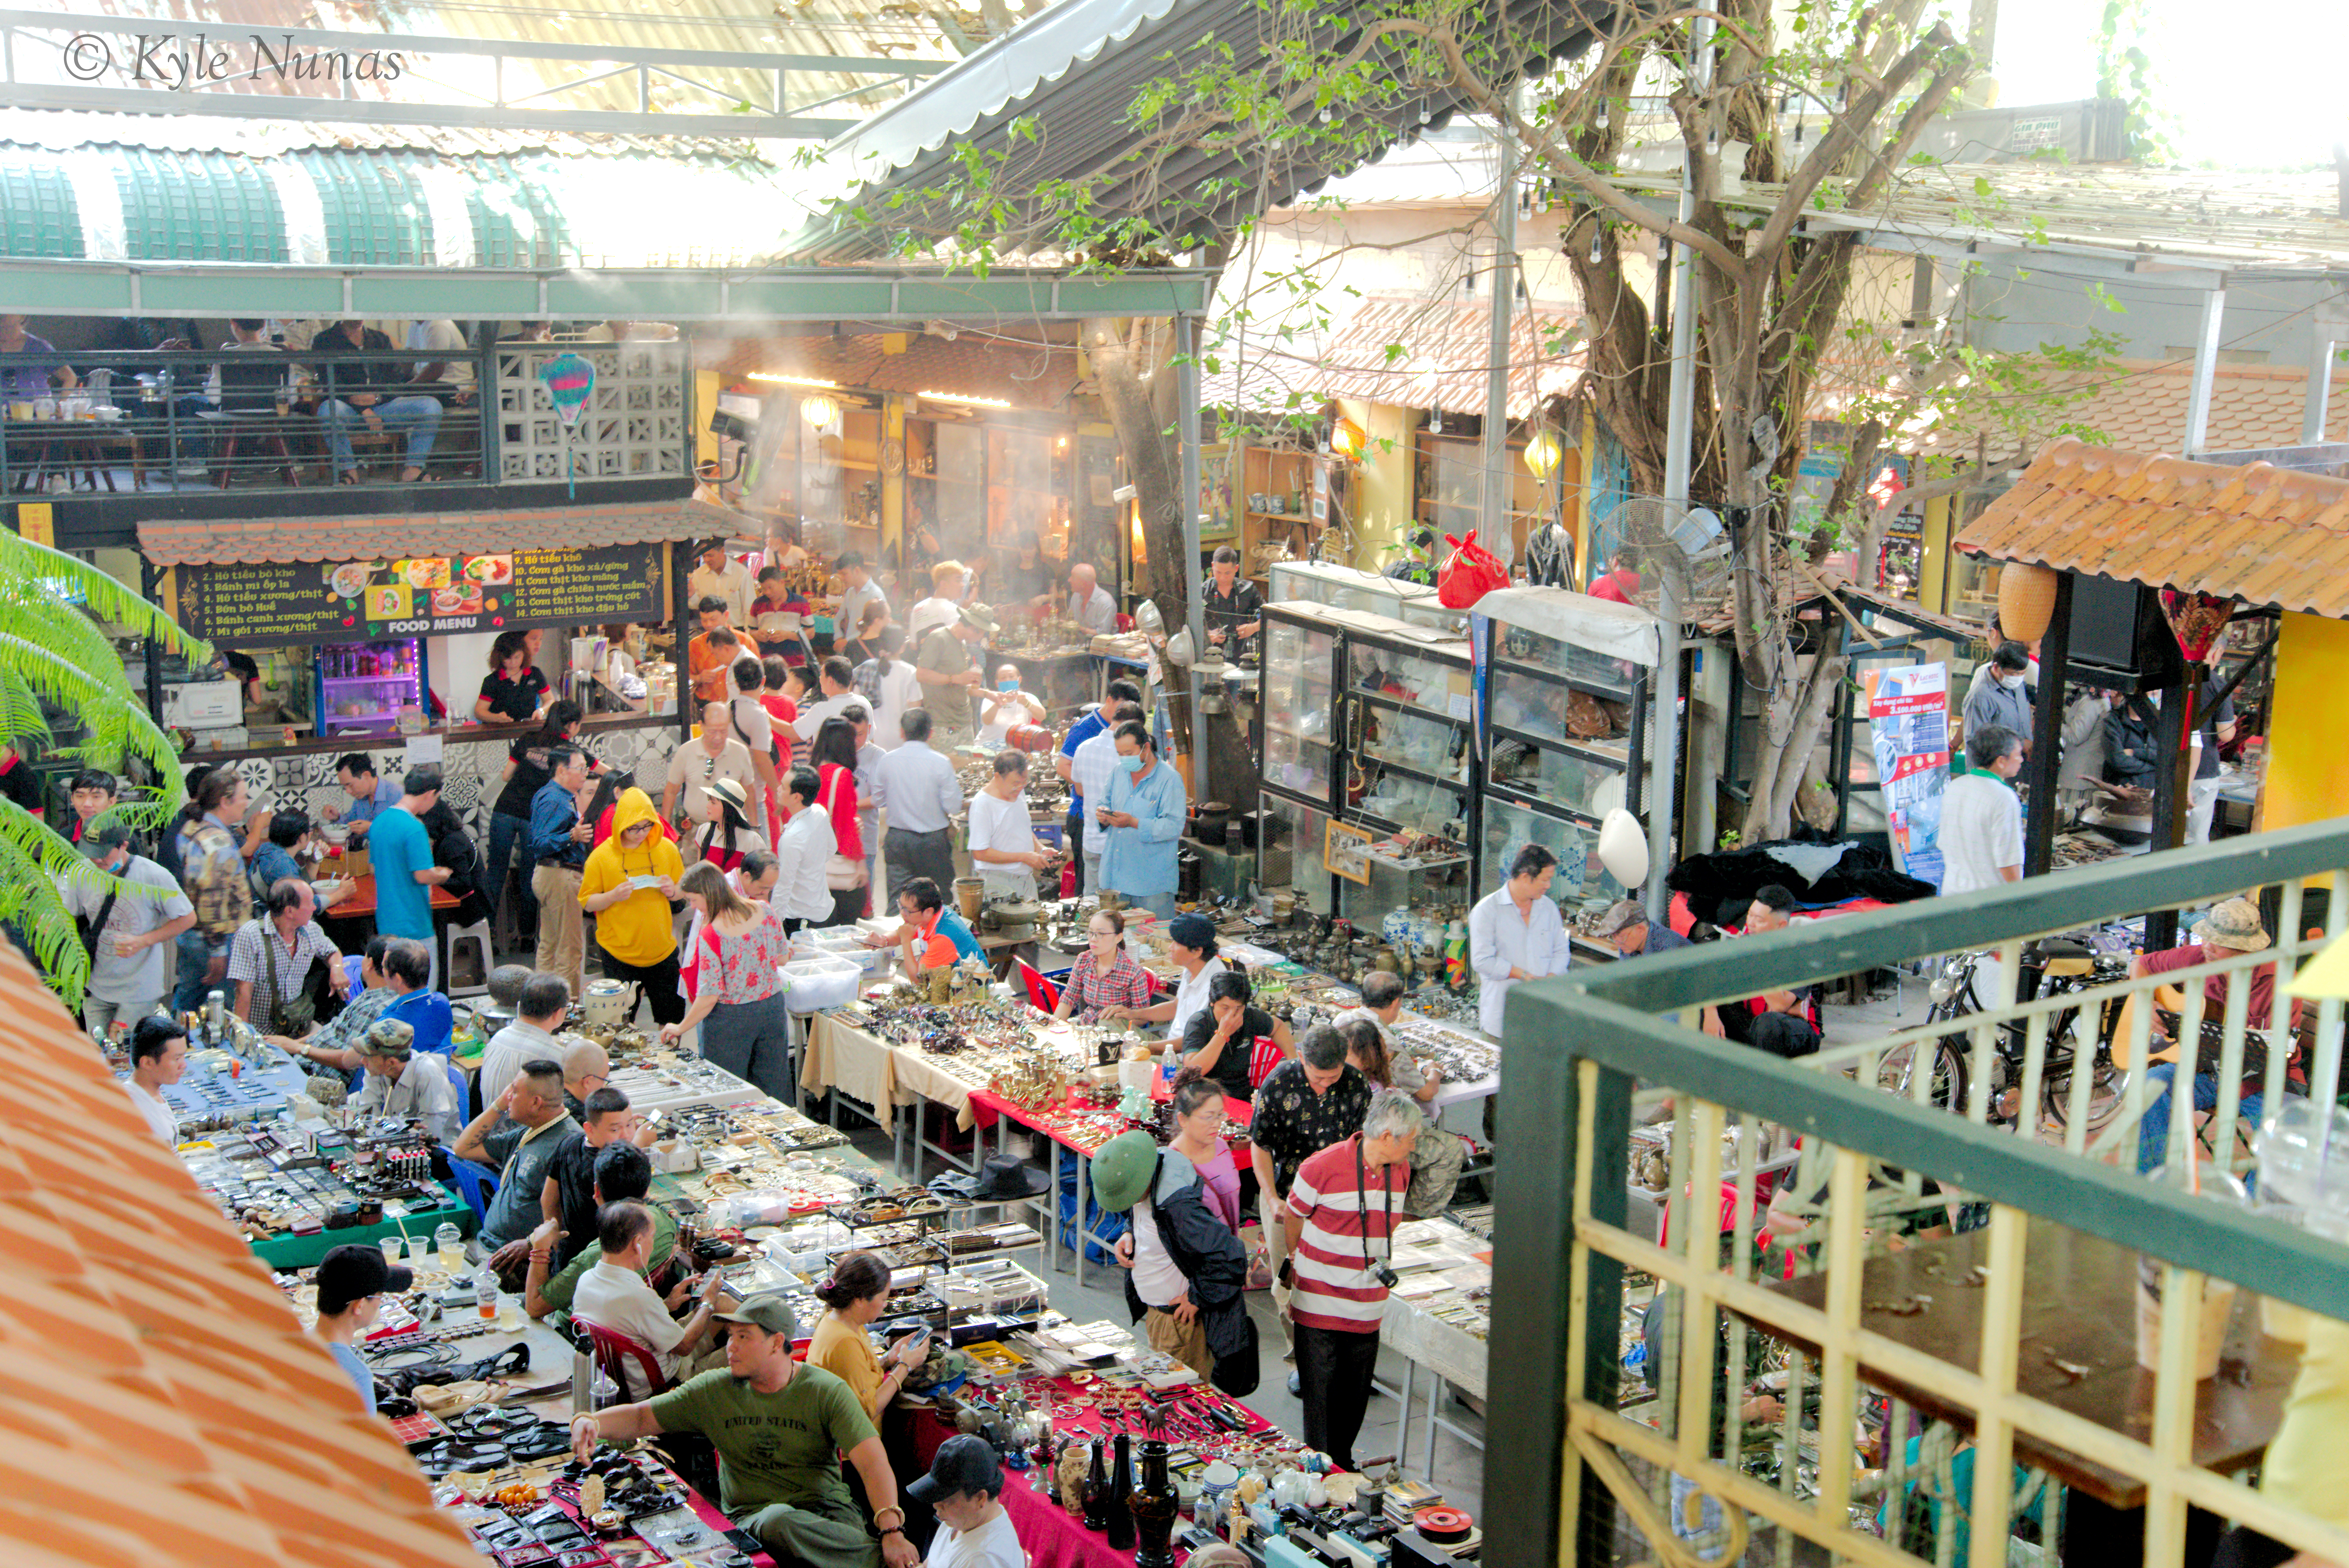 An antique market Nunas considered as one of the 'fantastic hidden worlds' in Ho Chi Minh City he discovered after three year living in the city. Photo: Kyle Nunas